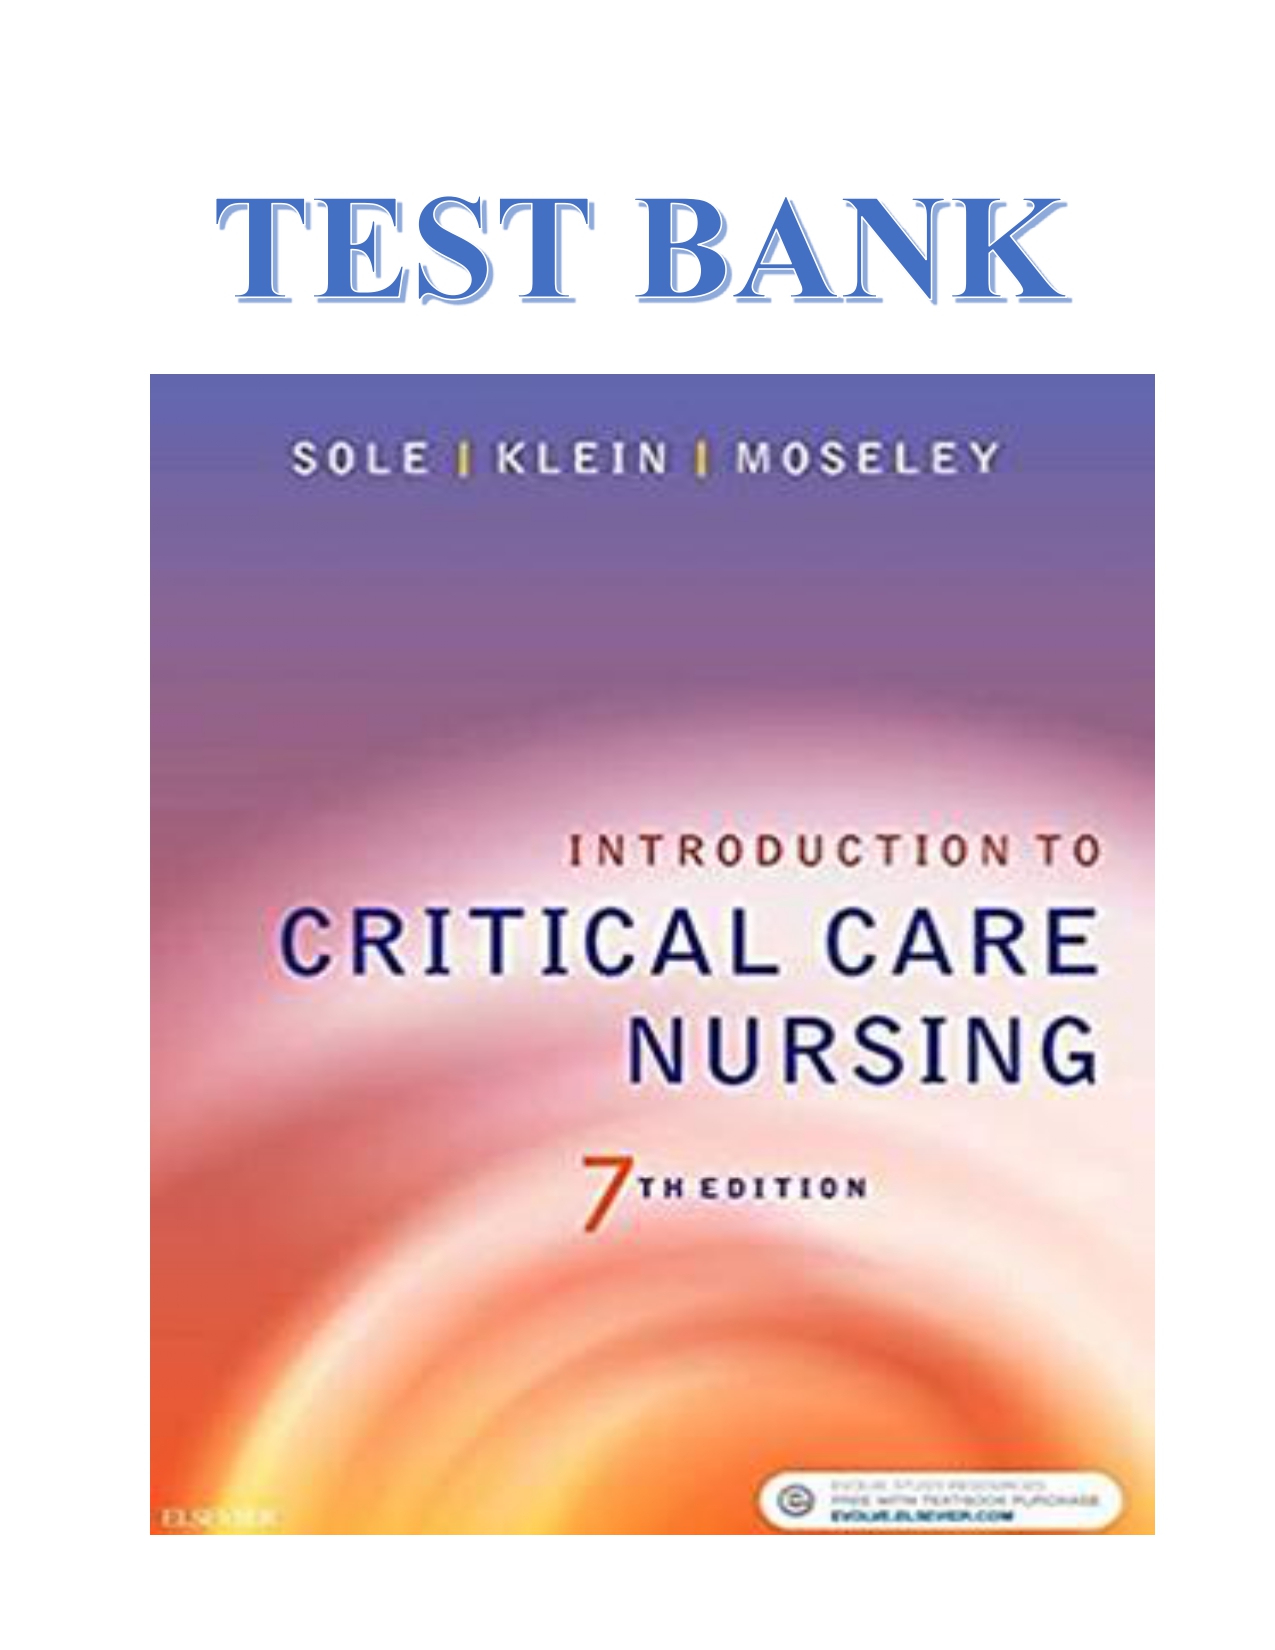 TEST BANK FOR INTRODUCTION TO CRITICAL CARE NURSING, 7TH EDITION, BY MARY  LOU SOLE, DEBORAH GOLDENBERG KLEIN, MARTHE J. MOSELEY, ISBN: 9780323375511,  ISBN: 9780323375498, ISBN: 9780323375528, ISBN: 9780323377034 - Payhip